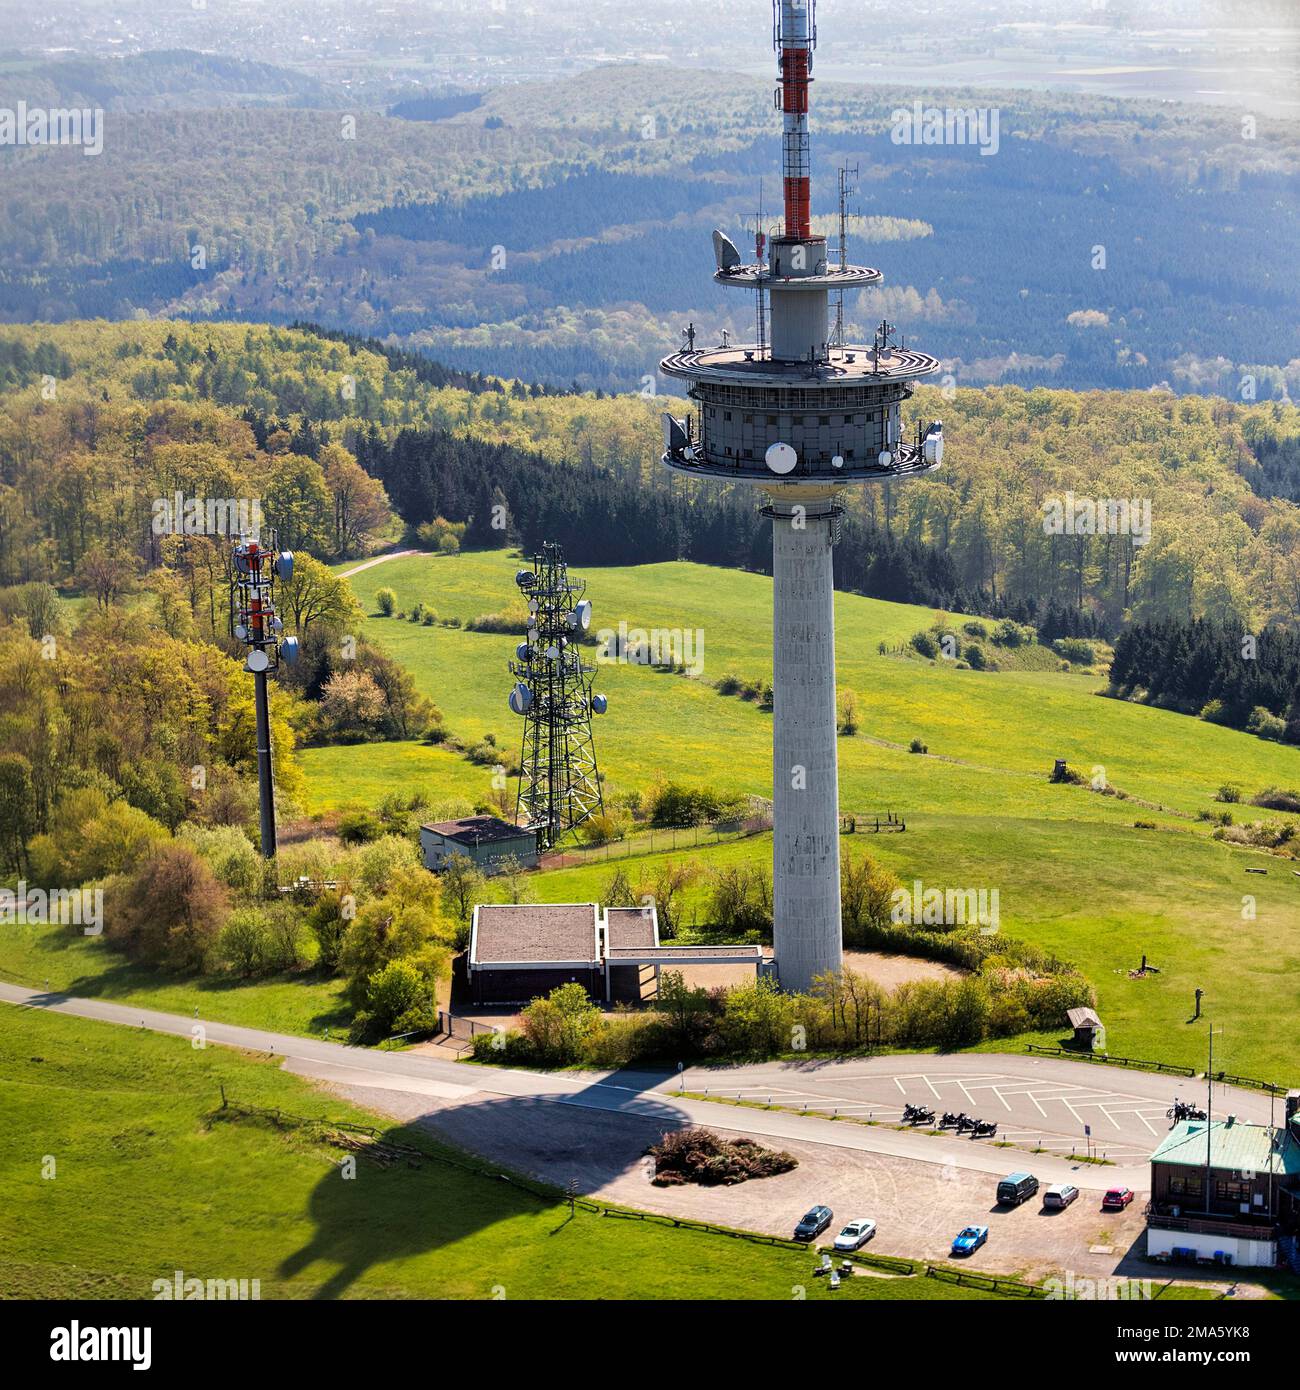 View of Koeterberg telecommunications tower and transmission masts from above, aerial view, Luegde, Teutoburg Forest Egge Mountains nature Park Stock Photo